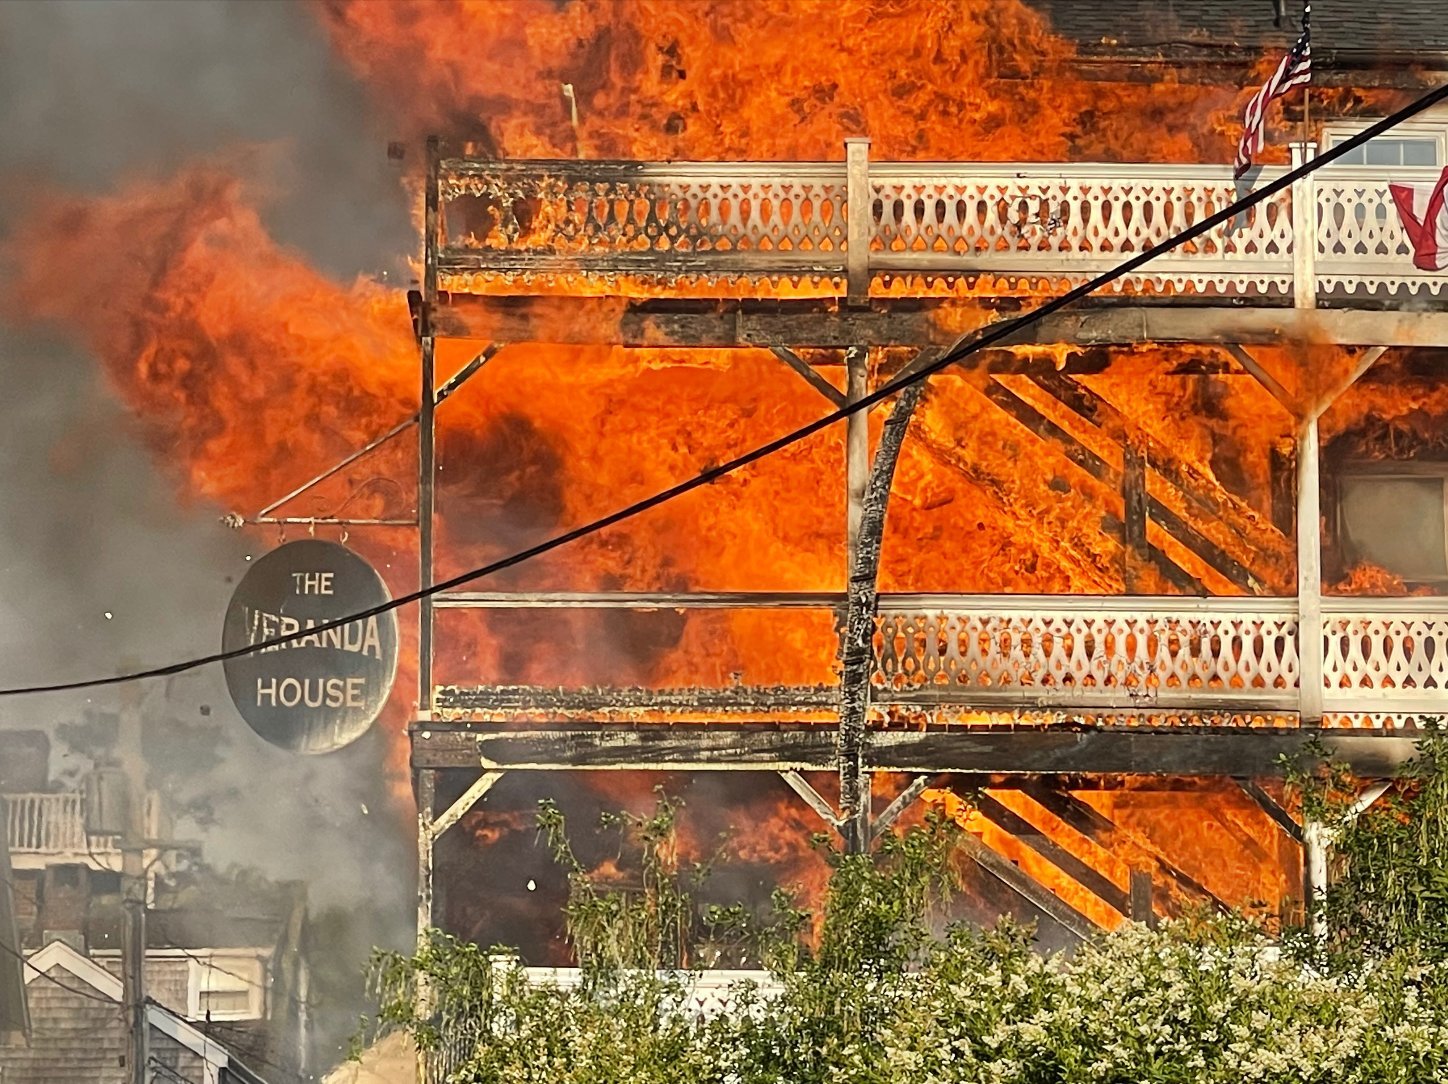 It took firefighters more than 12 hours to fully extinguish the blaze that destroyed the Veranda House hotel July 9.